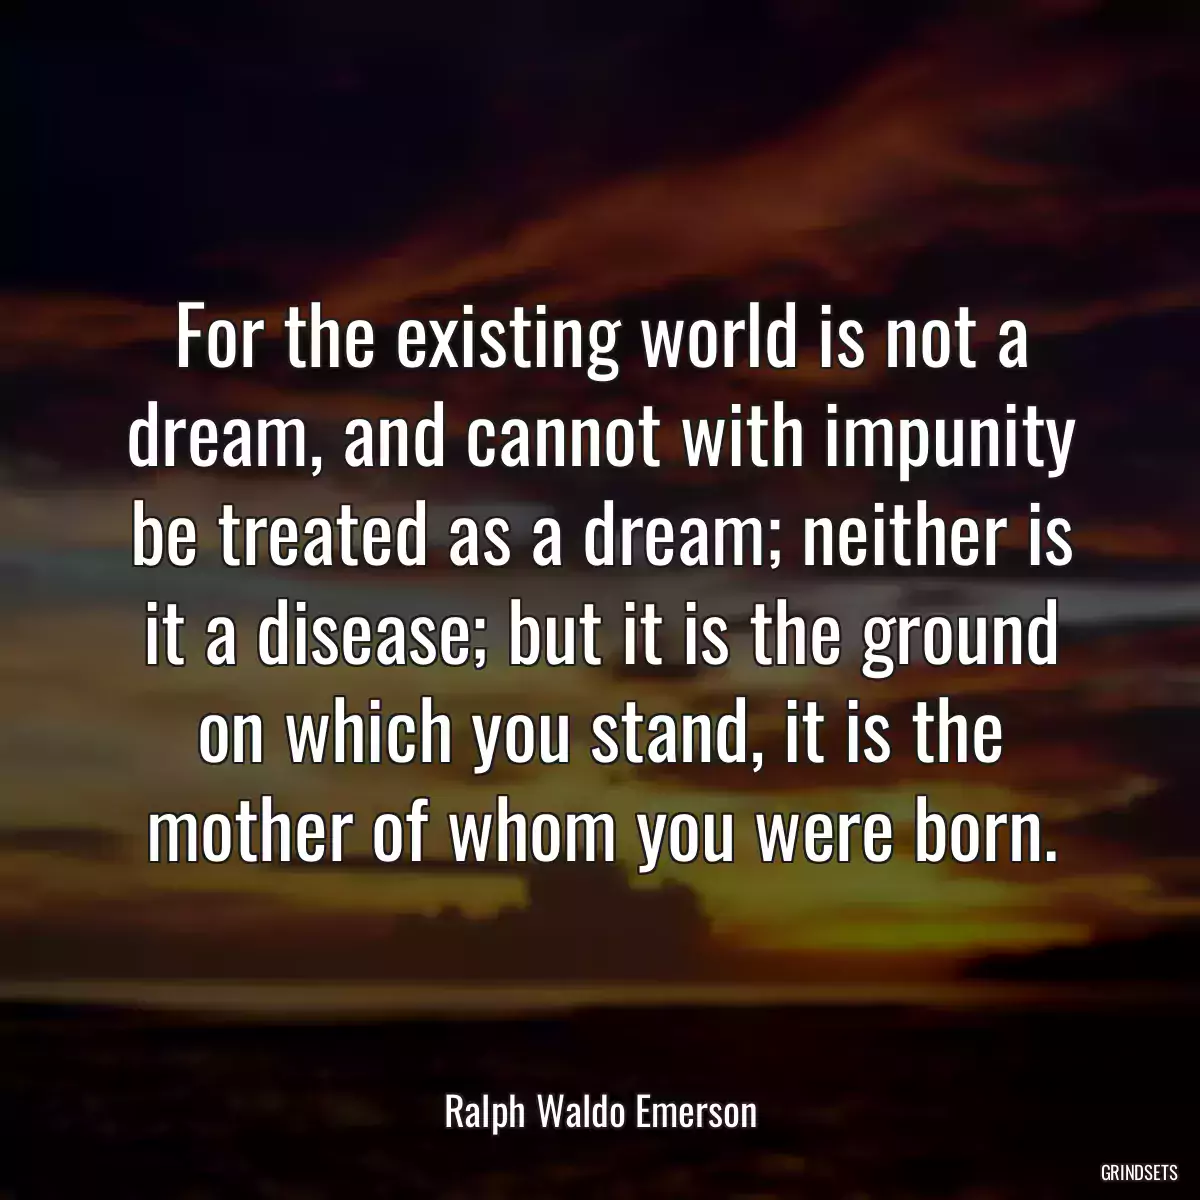 For the existing world is not a dream, and cannot with impunity be treated as a dream; neither is it a disease; but it is the ground on which you stand, it is the mother of whom you were born.